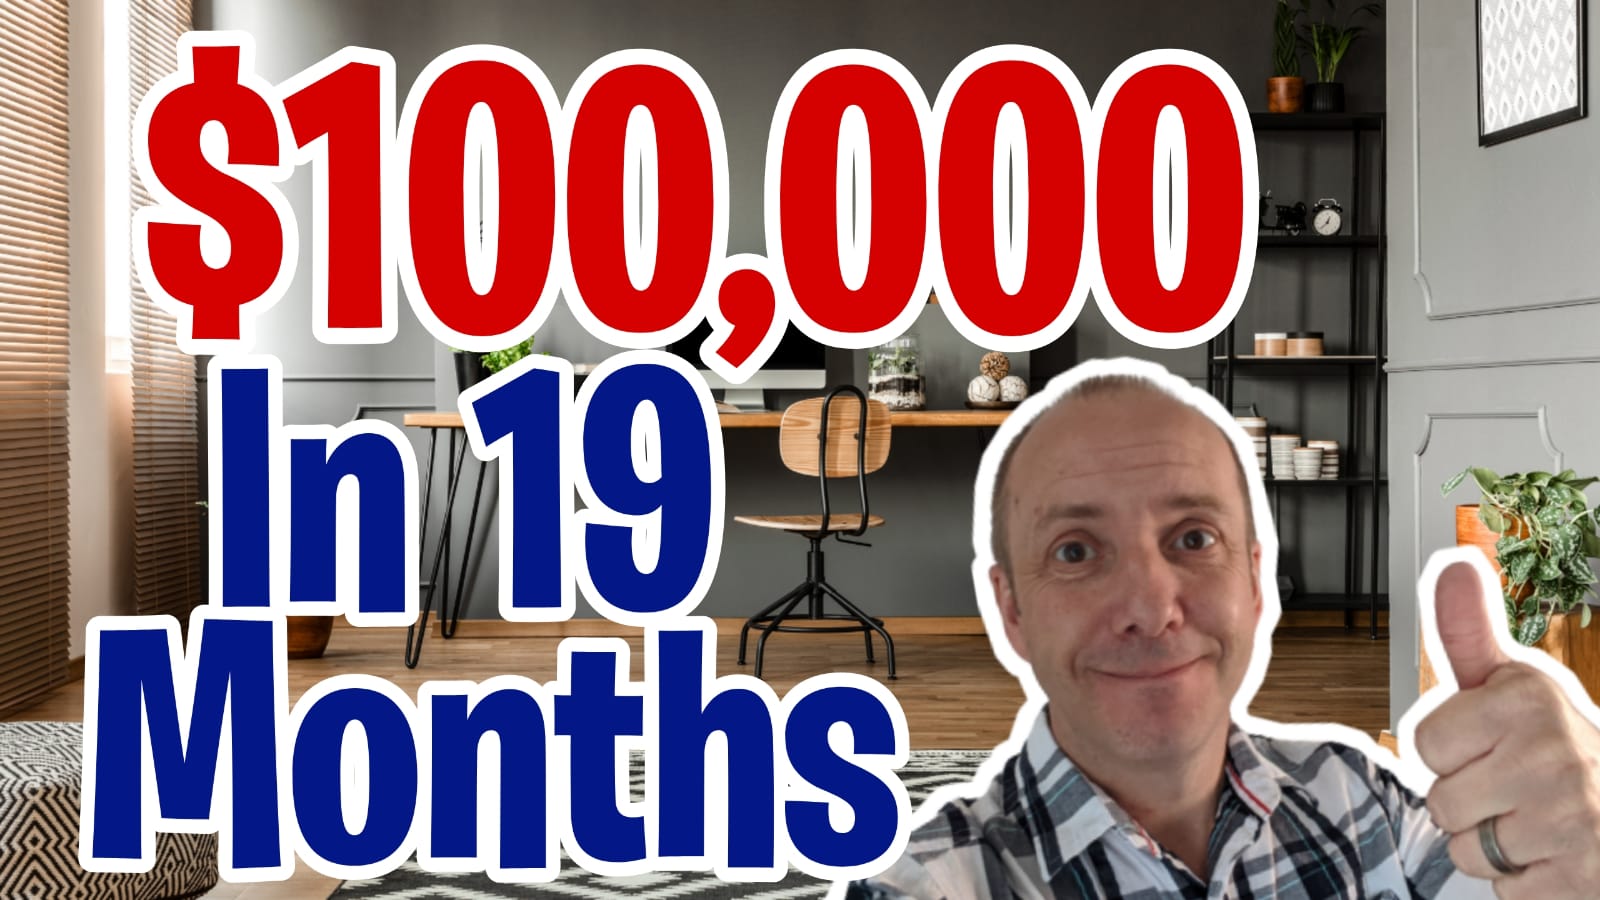 How I grew my site to over $100k in 19 months